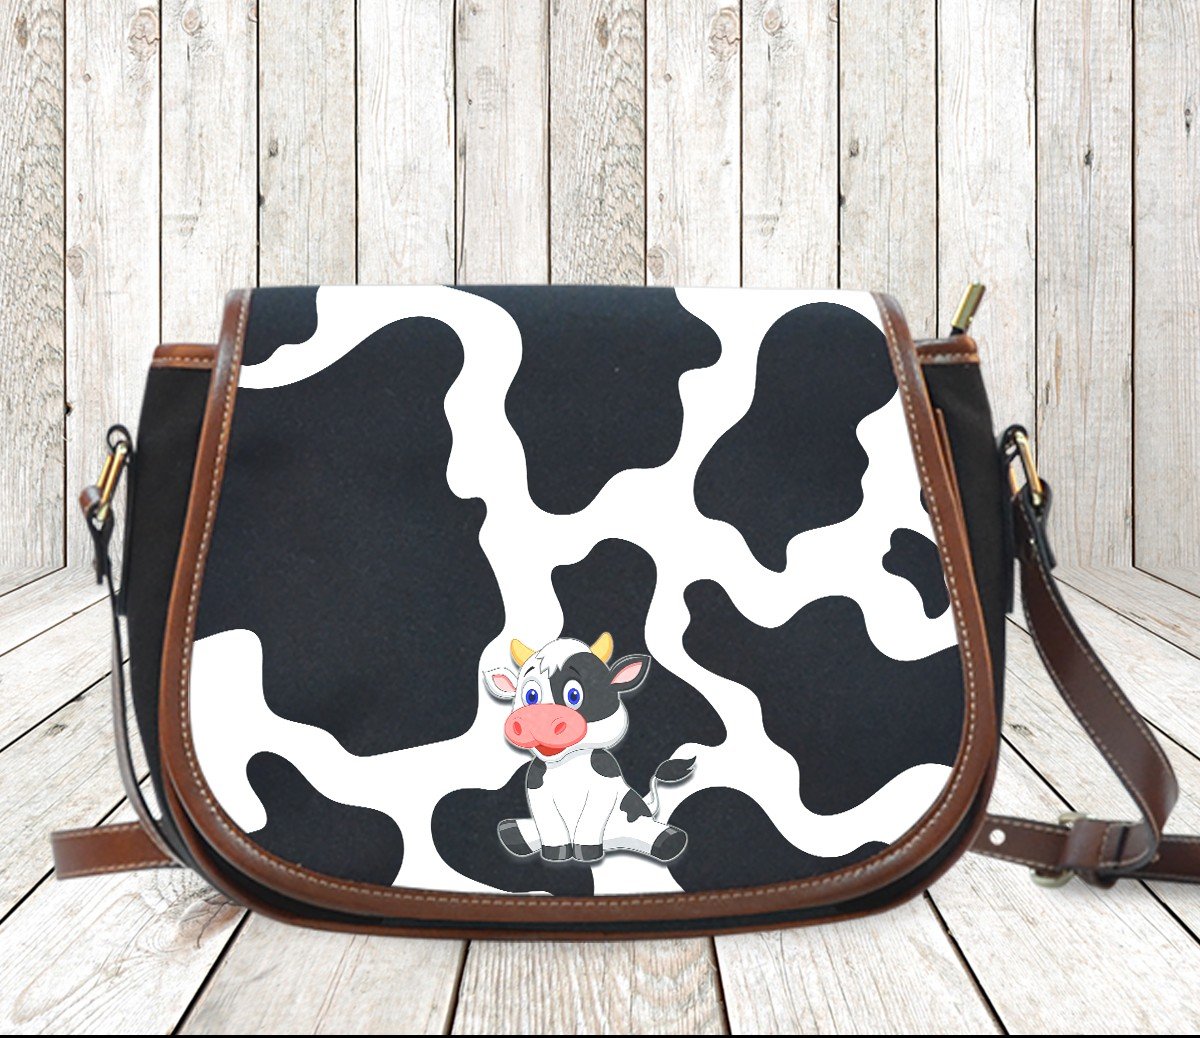 Exclusive Cow Saddle Bag CL1211 Cow Saddle Bag - Blank Official COW PRINT Merch